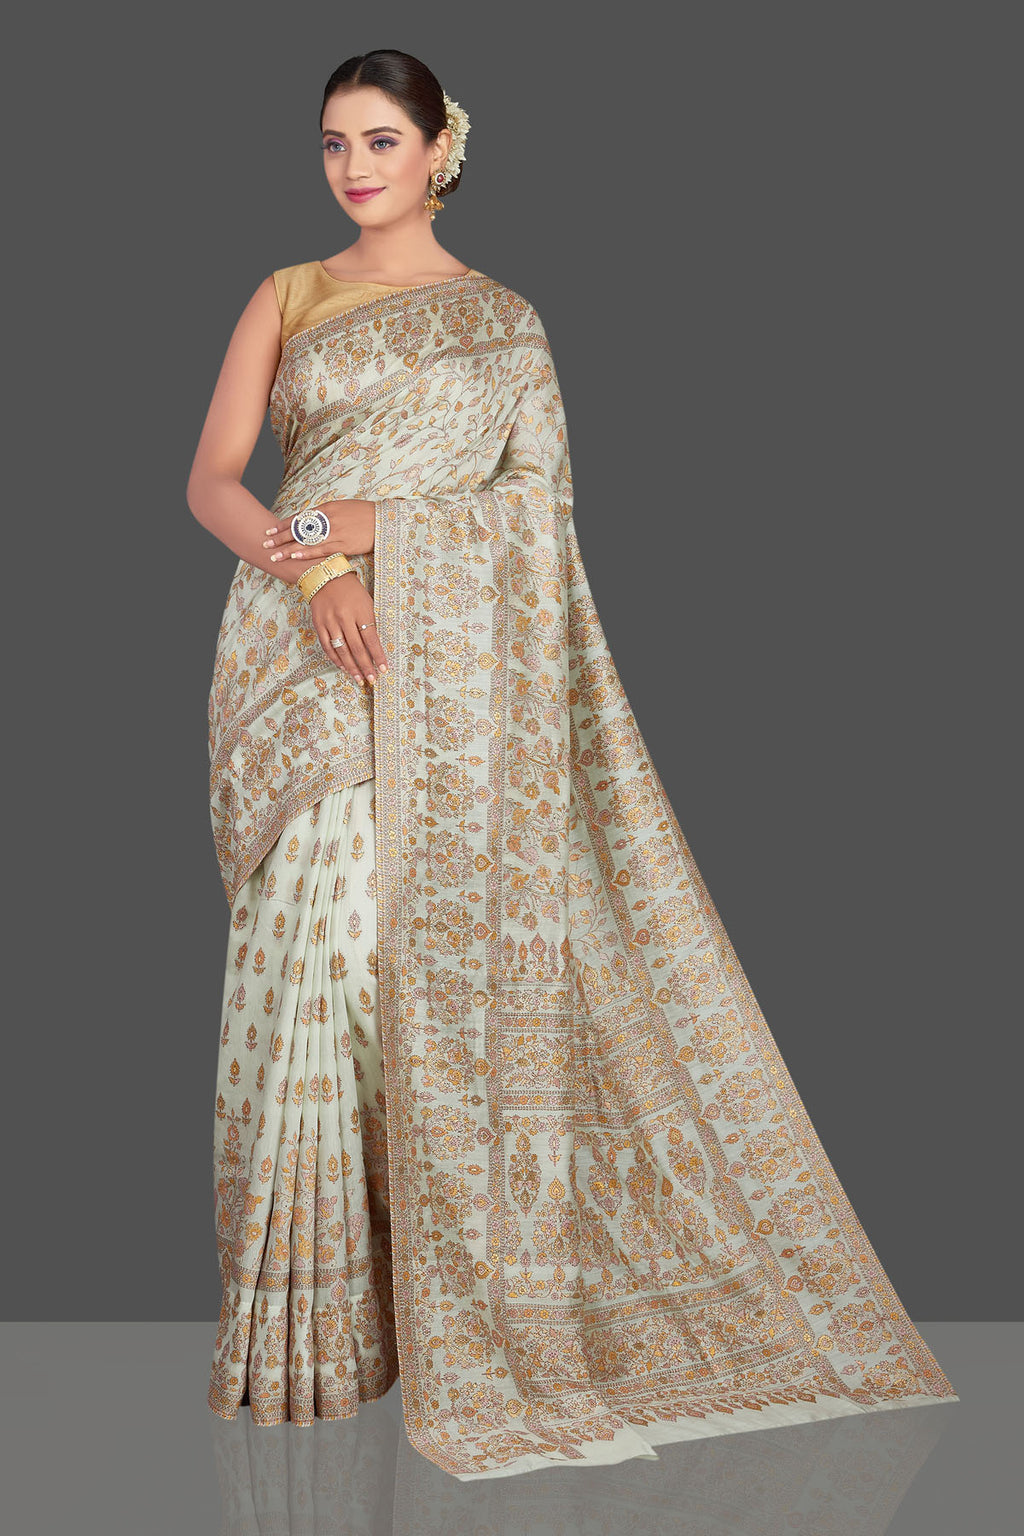 Buy stunning mint green Kani weave sari online in USA. Make your presence felt on special occasions in beautiful embroidered sarees, handwoven saris, pure silk saris, tussar sarees from Pure Elegance Indian saree store in USA.-full view